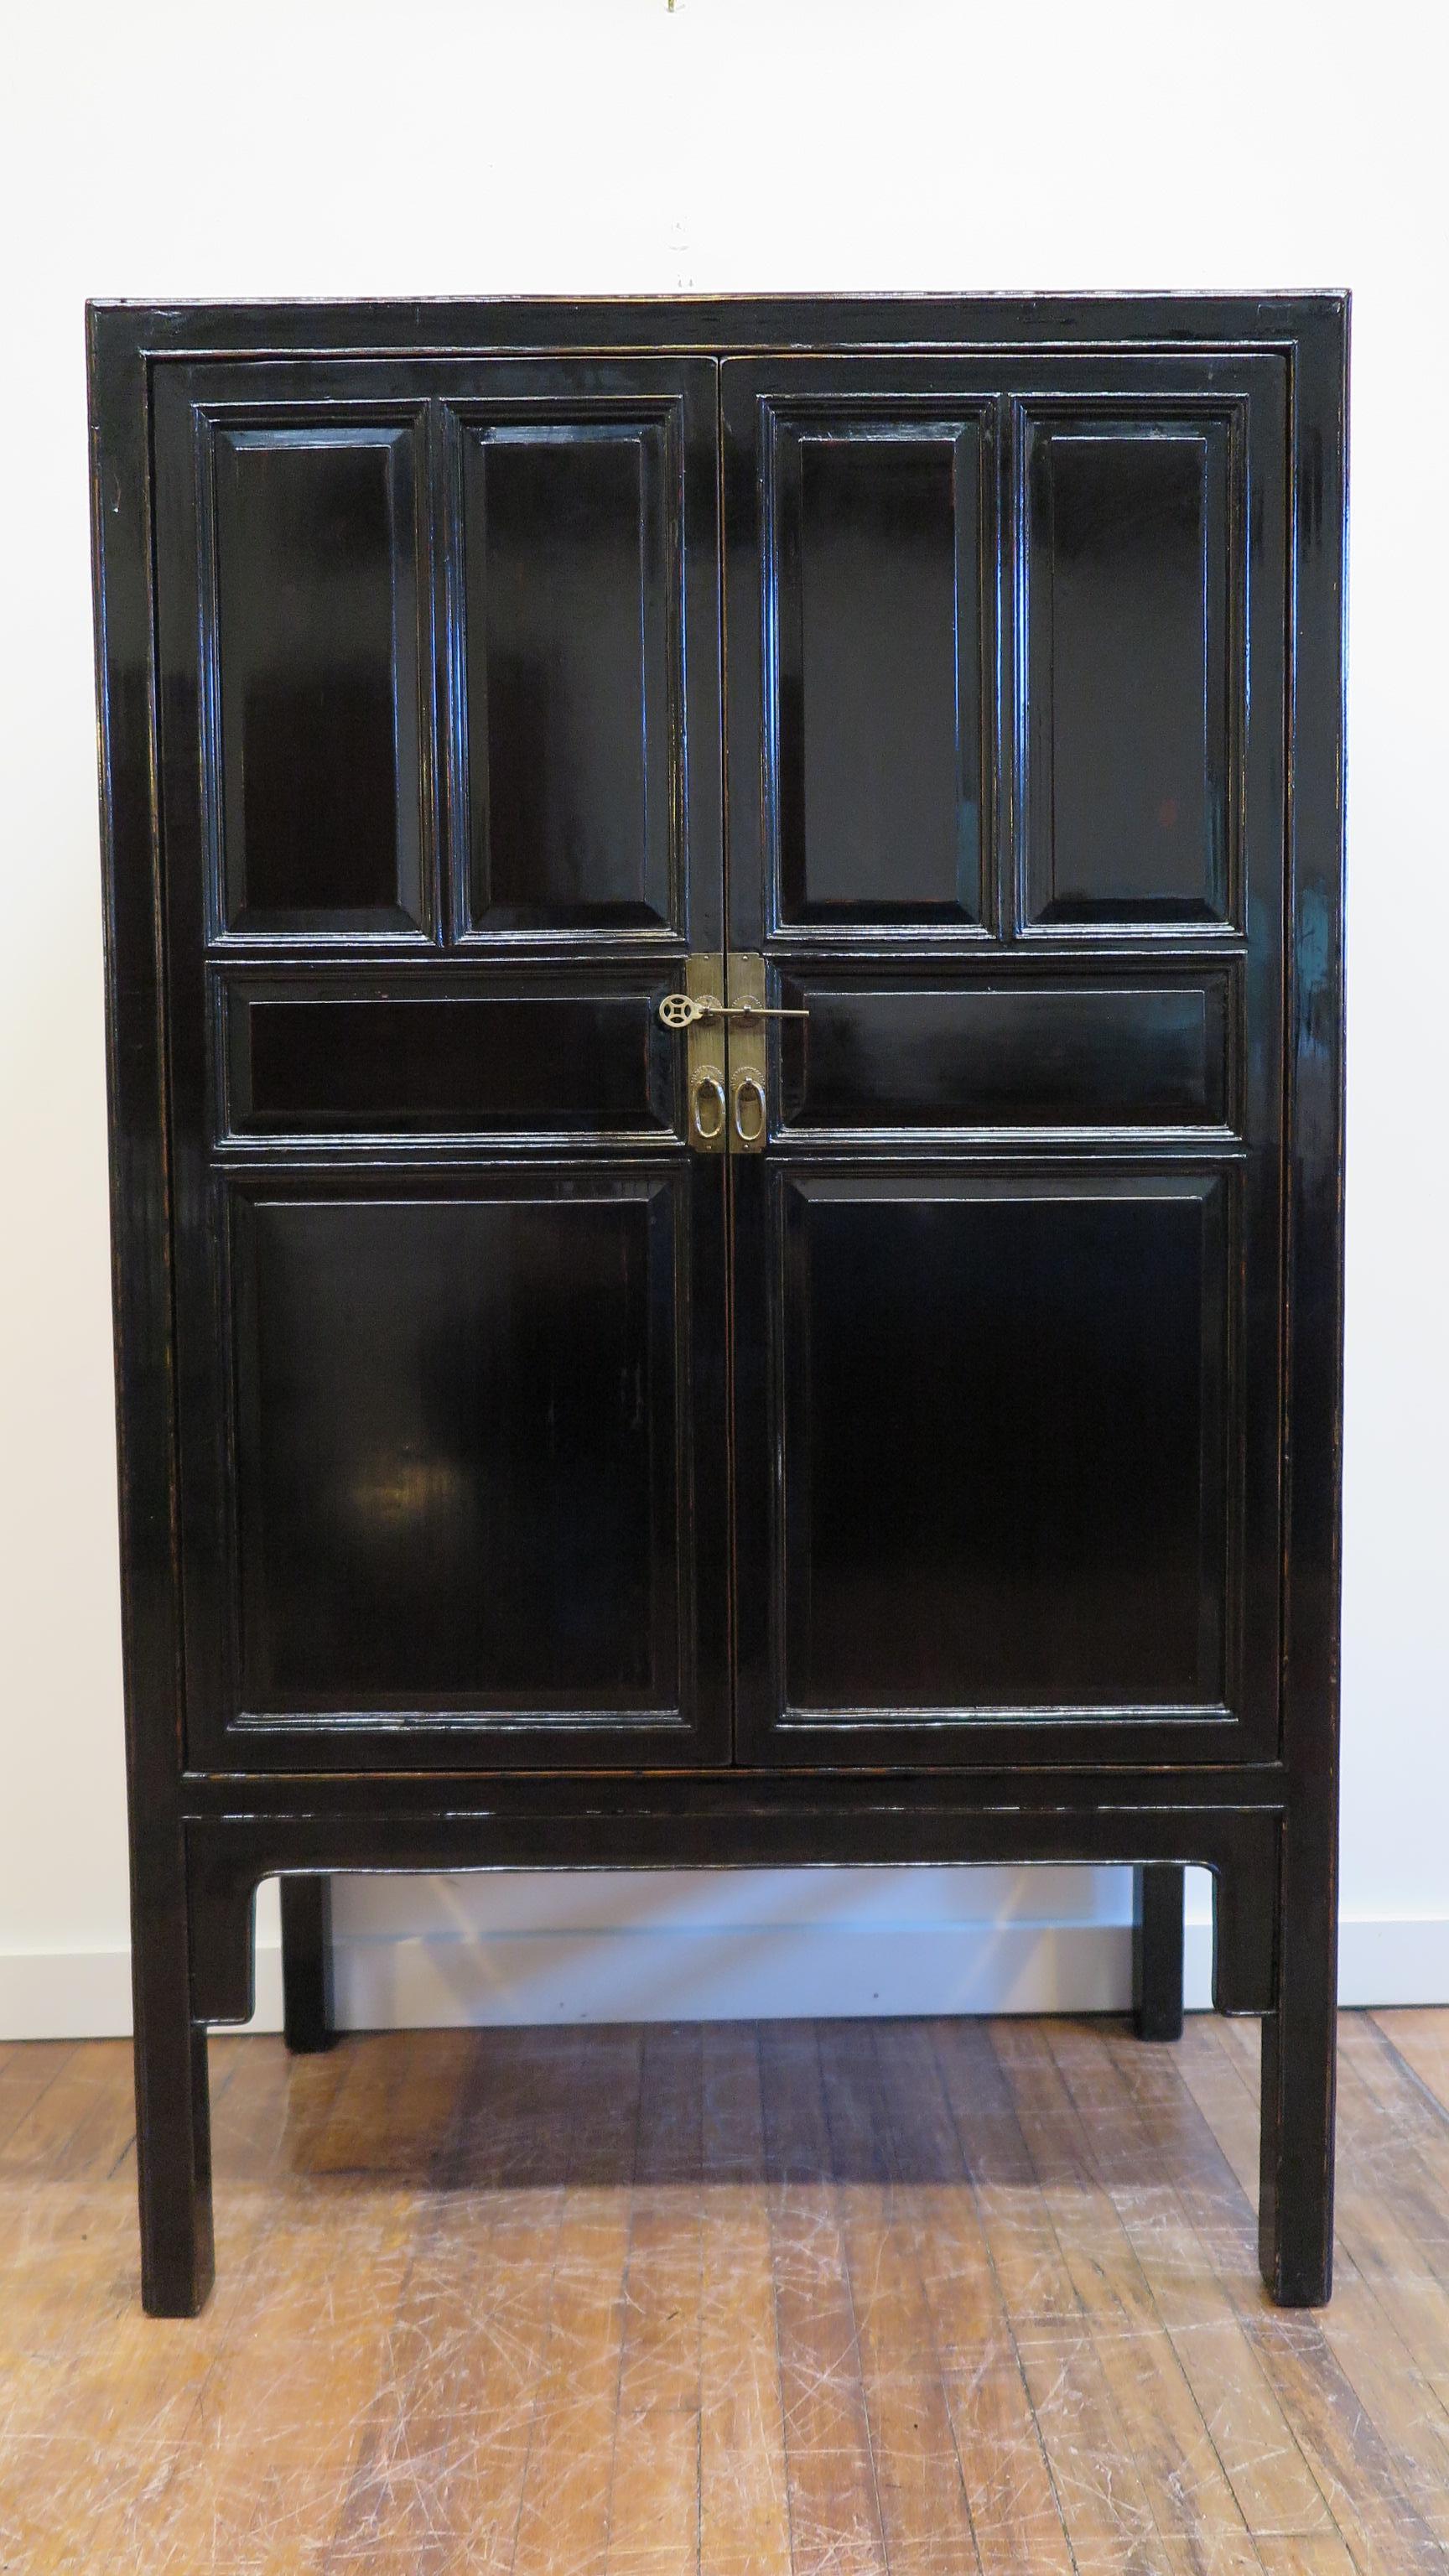 19th century Chinese black lacquer cabinet. A black lacquer Chinese scholars cabinet of cypress wood with black lacquer covering. In very fine condition, excellent, this 19th century Chinese panel cabinet has two drawers with two shelf's upper and